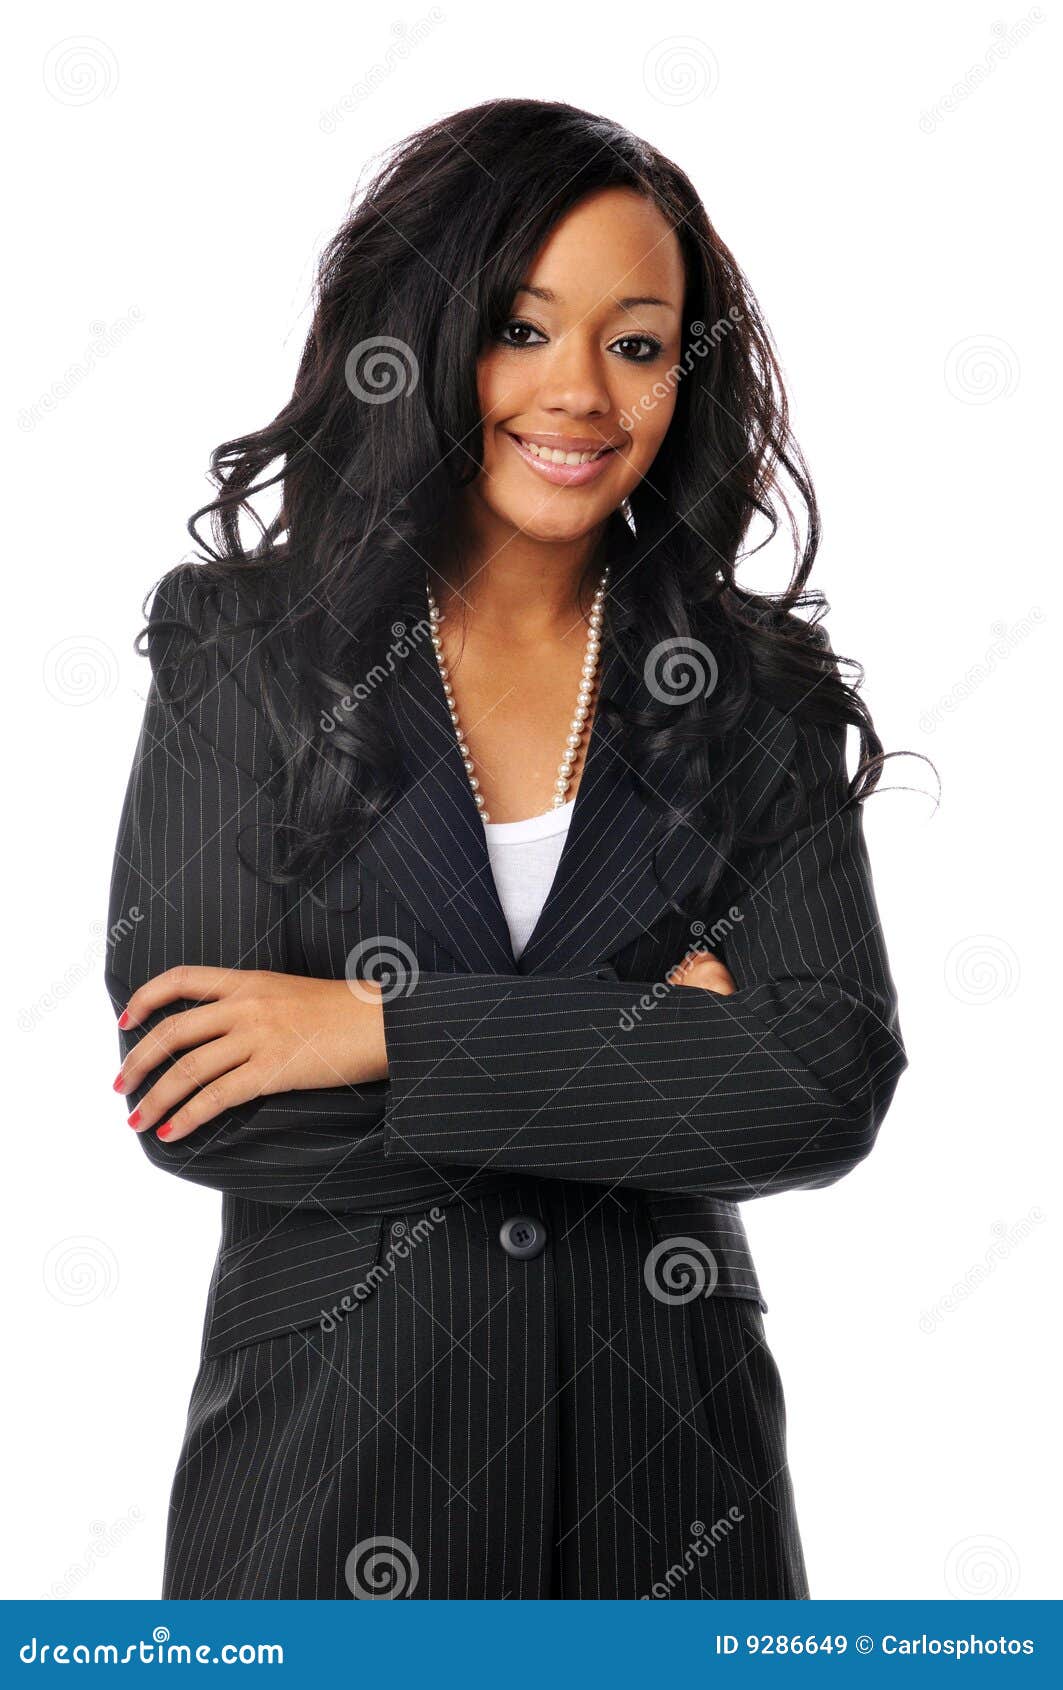 Beautiful Young Businesswoman Stock Image - Image of bright, happy: 9286649